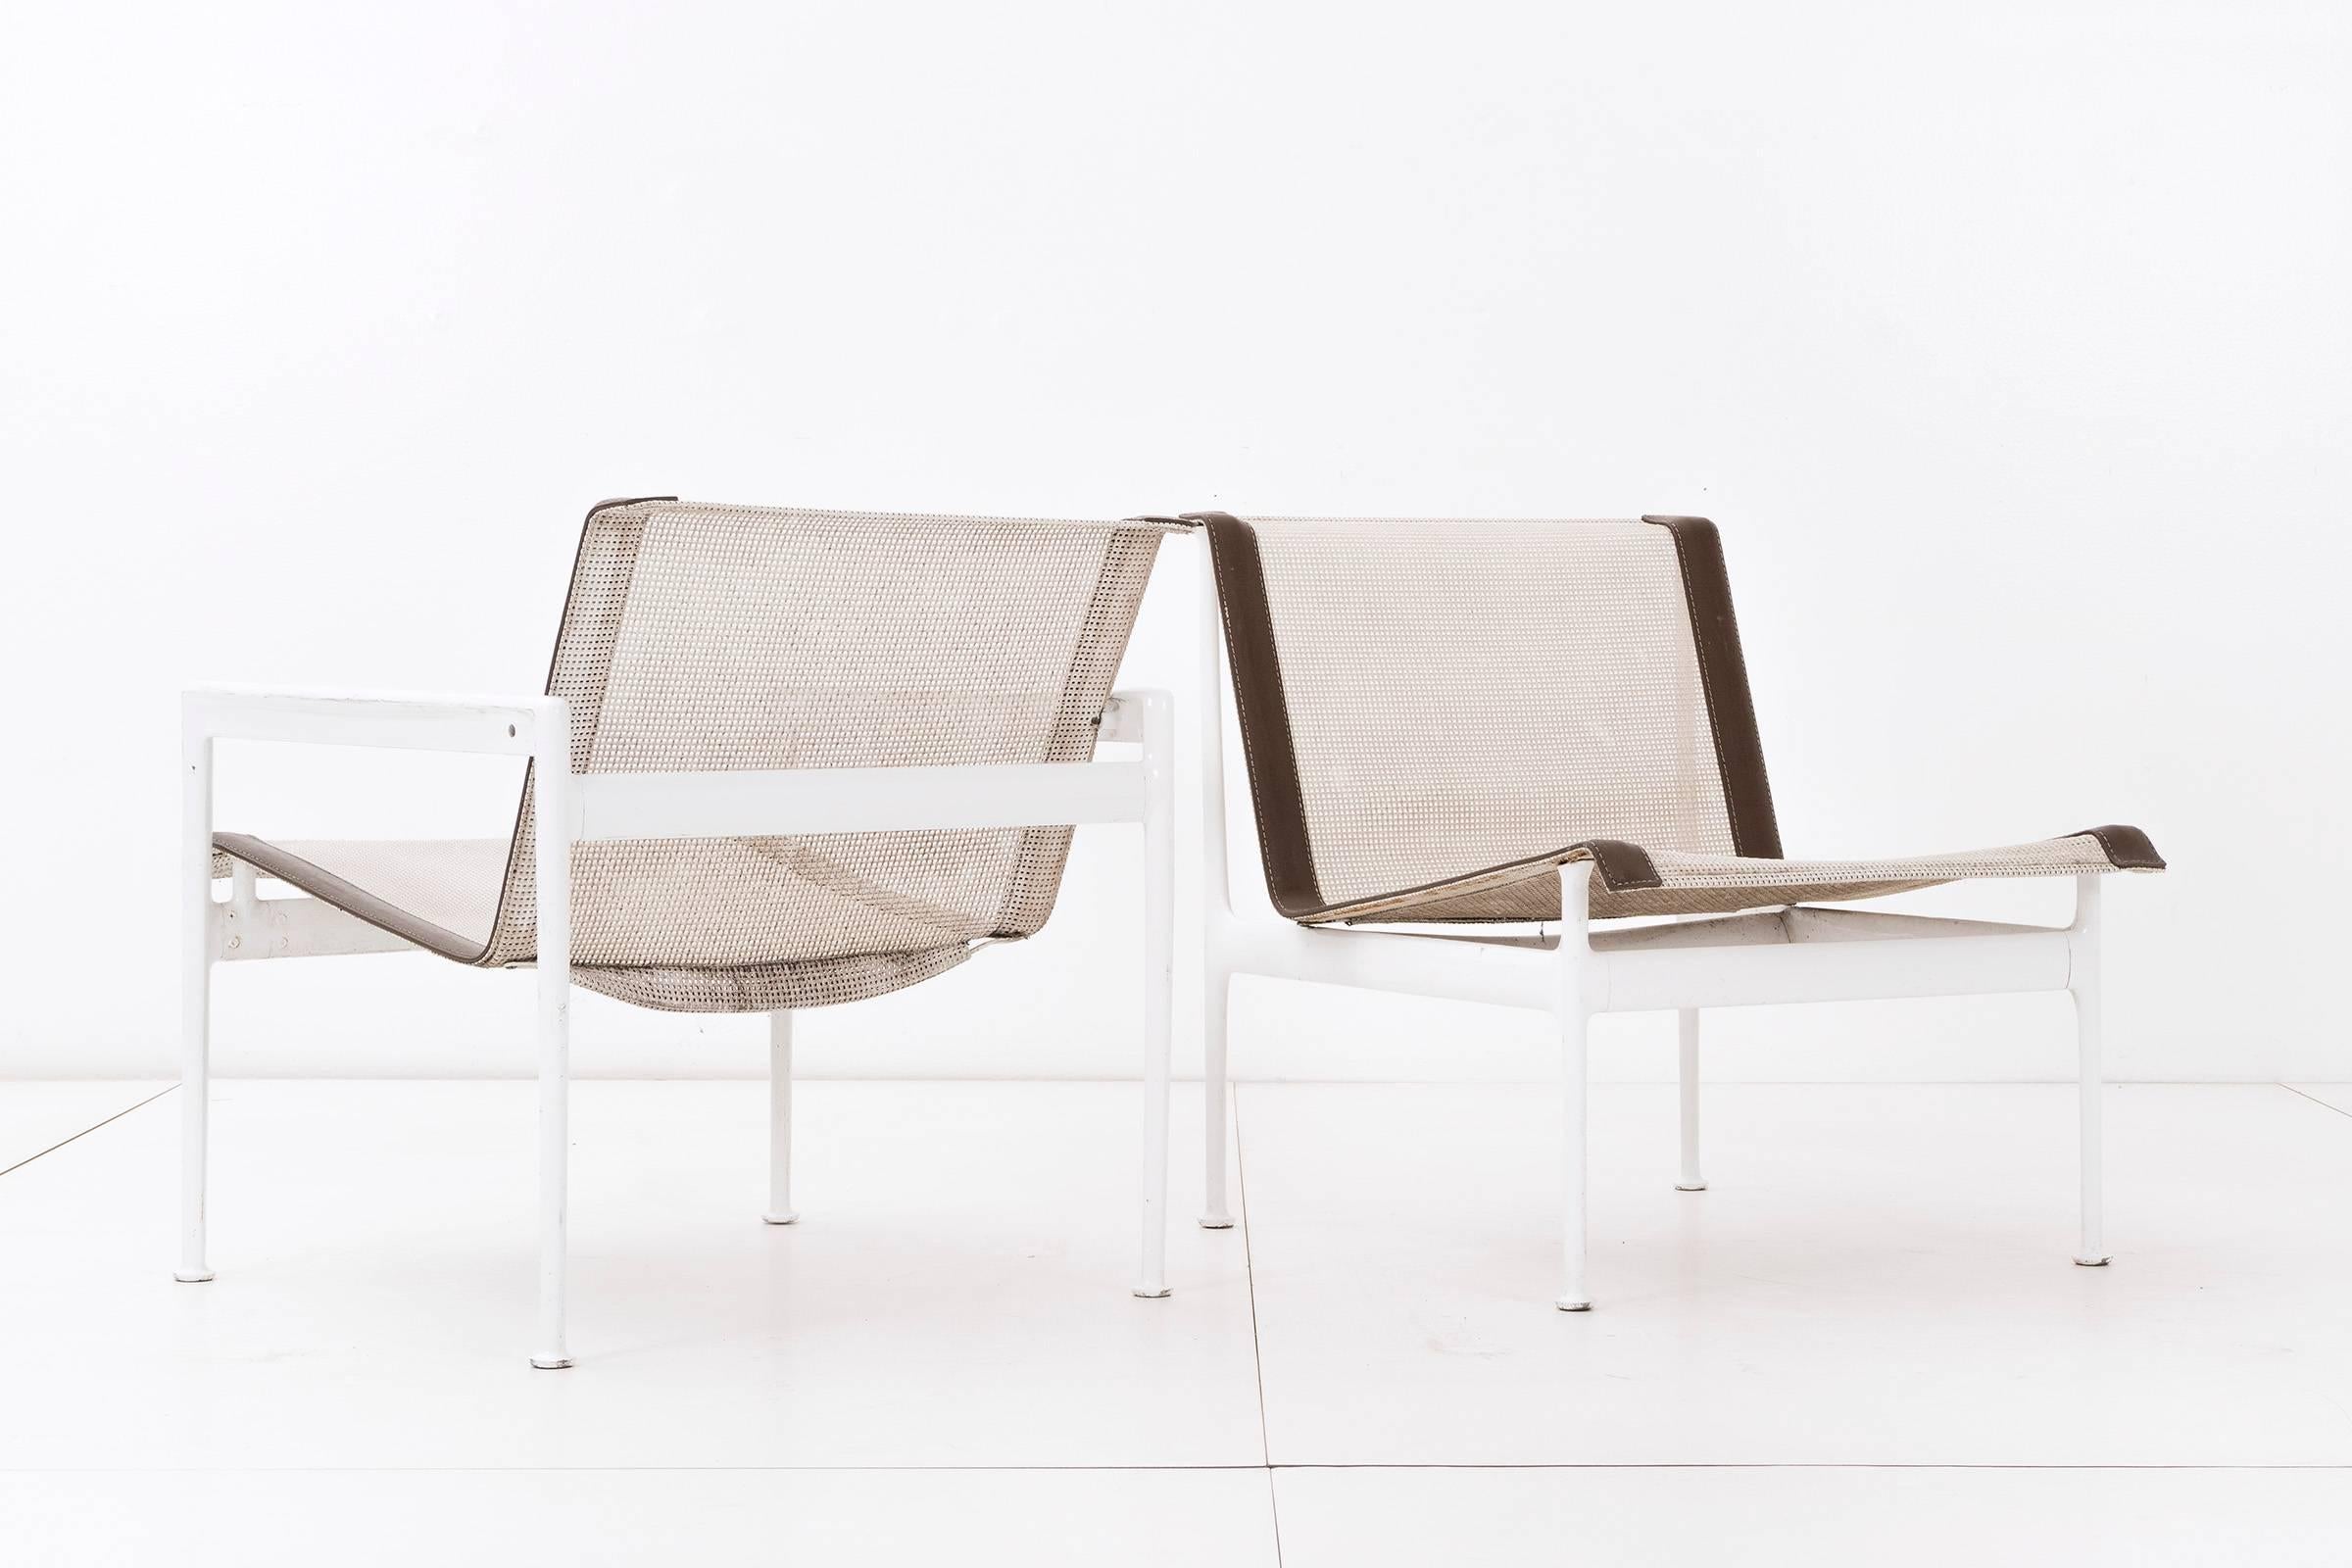 Richard Schultz for 1966 series for Knoll. Set of four outdoor lounge chairs.
No longer in production. Seat and back are woven vinyl coated polyester mesh with vinyl straps and stainless steel support and connects. The frame is cast and extruded